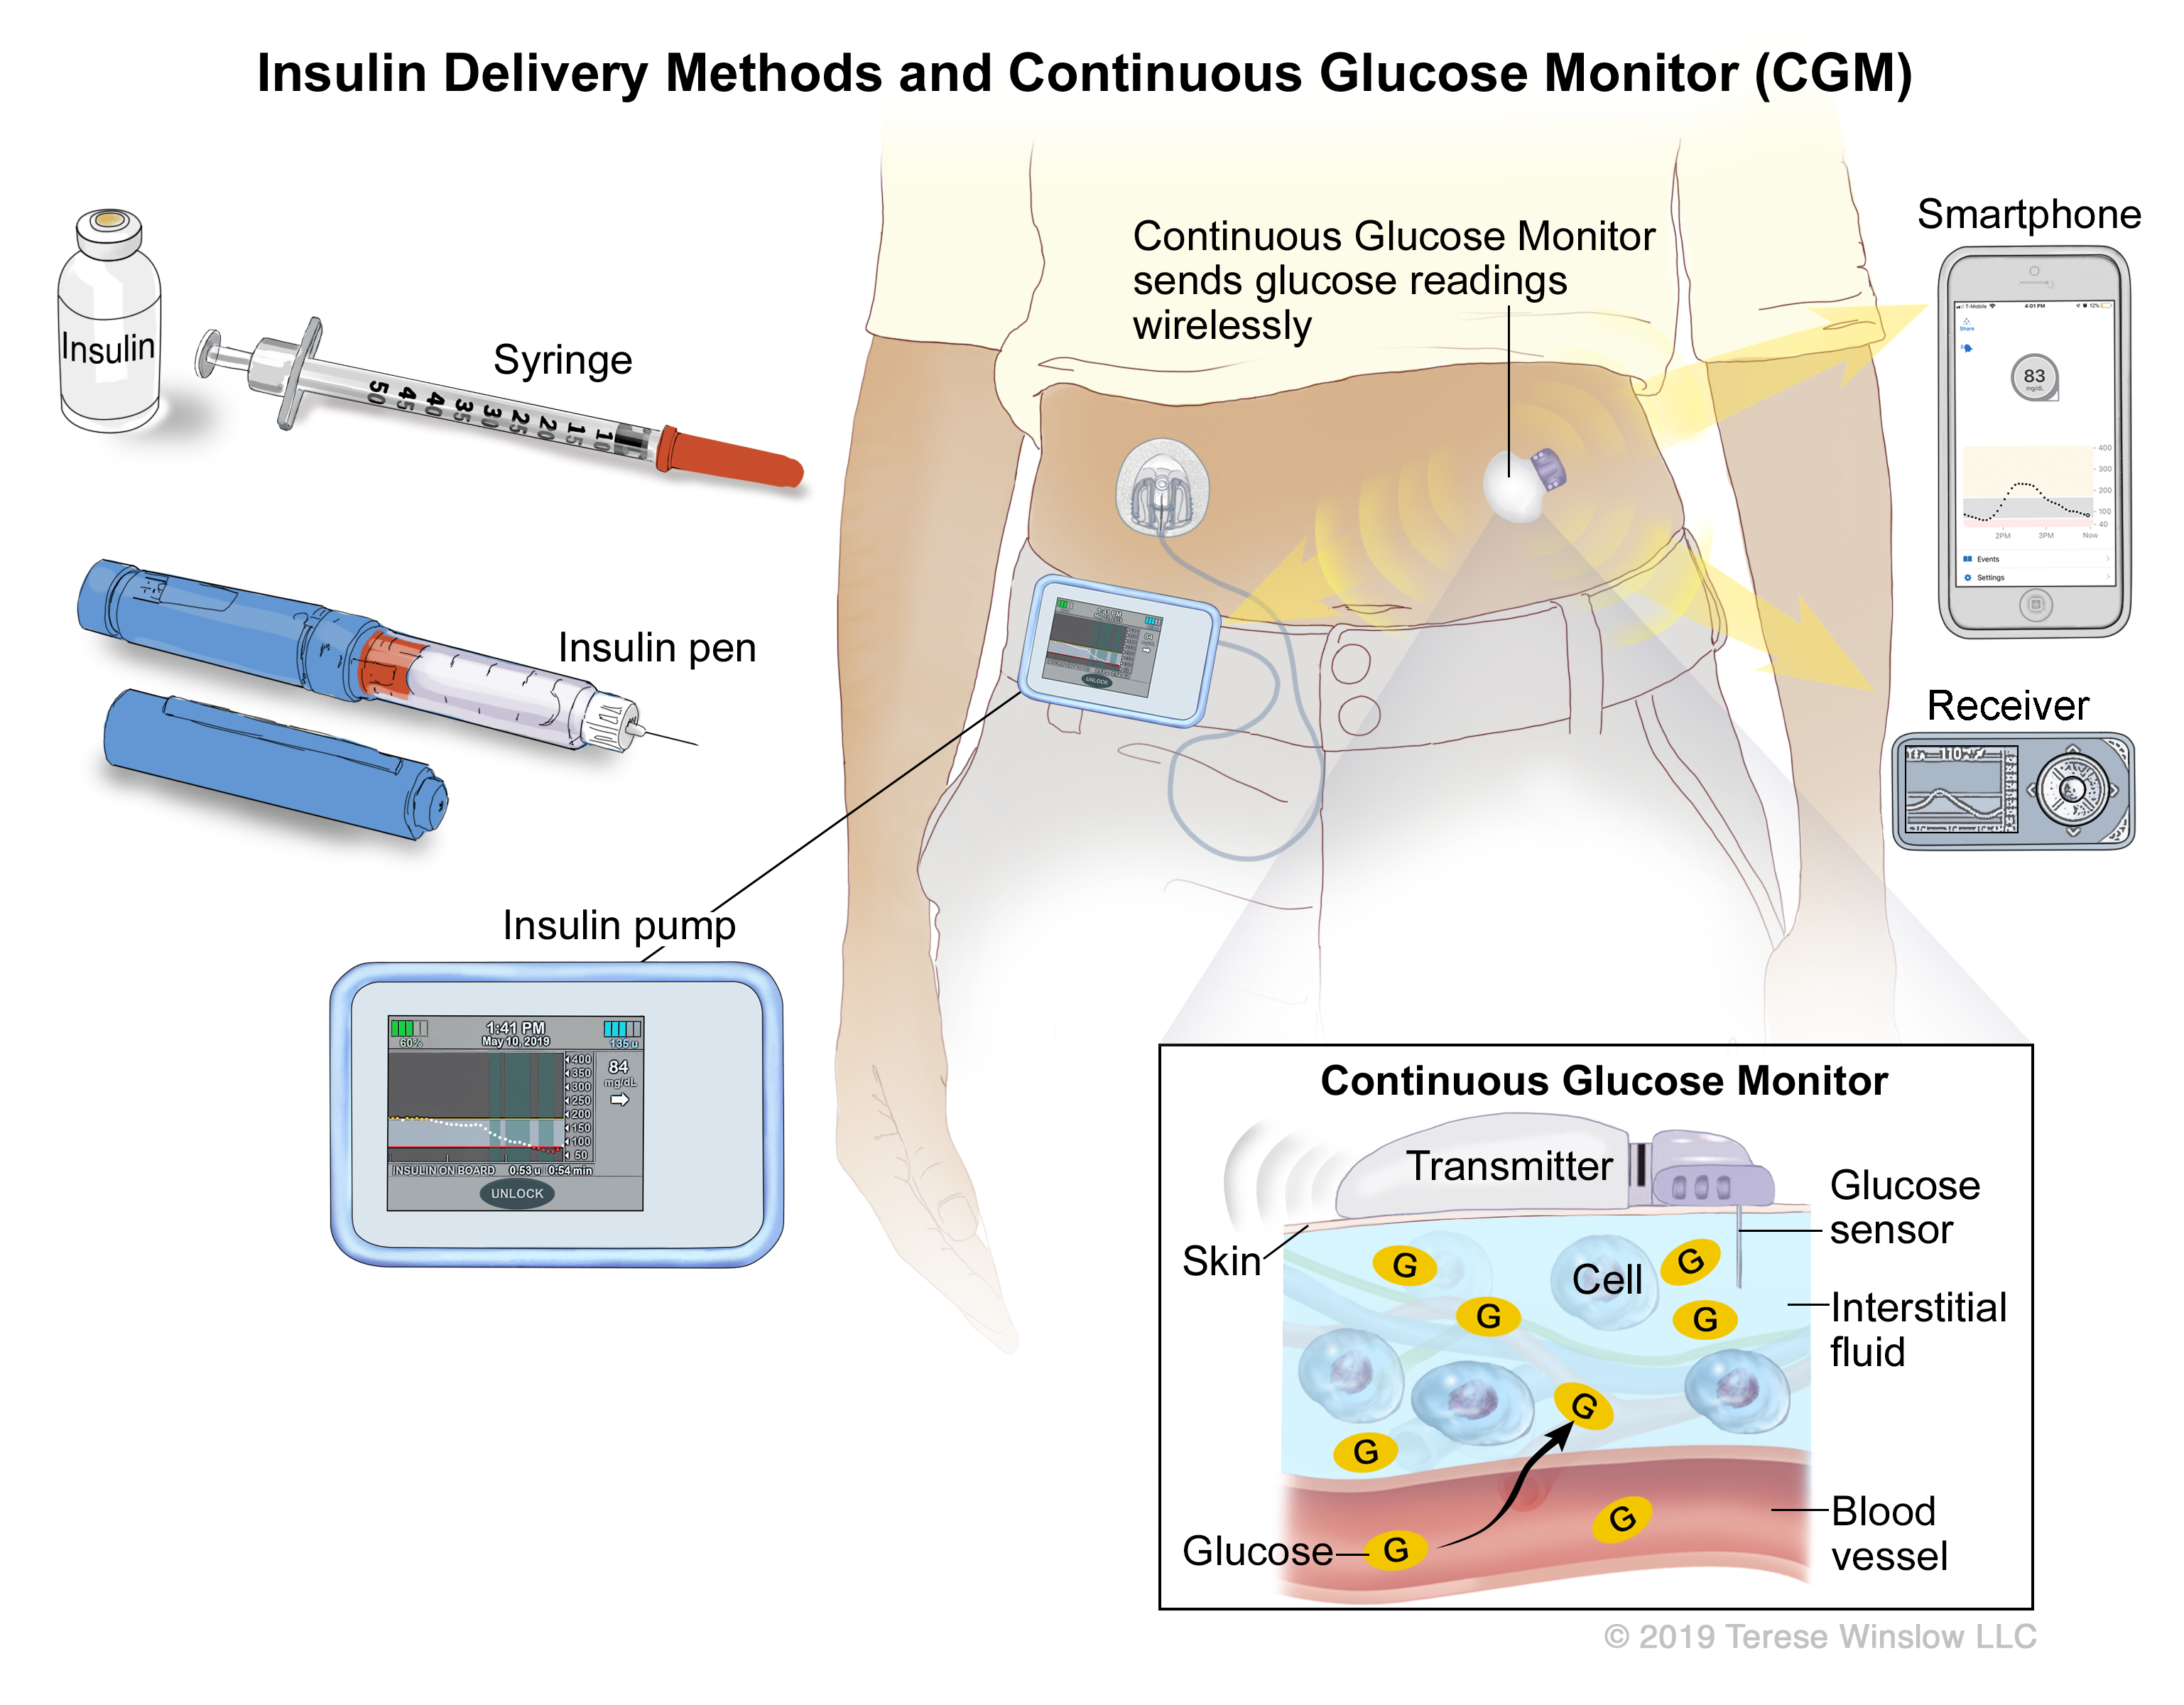 Medical illustration of insulin delivery methods and continous glucose monitoring